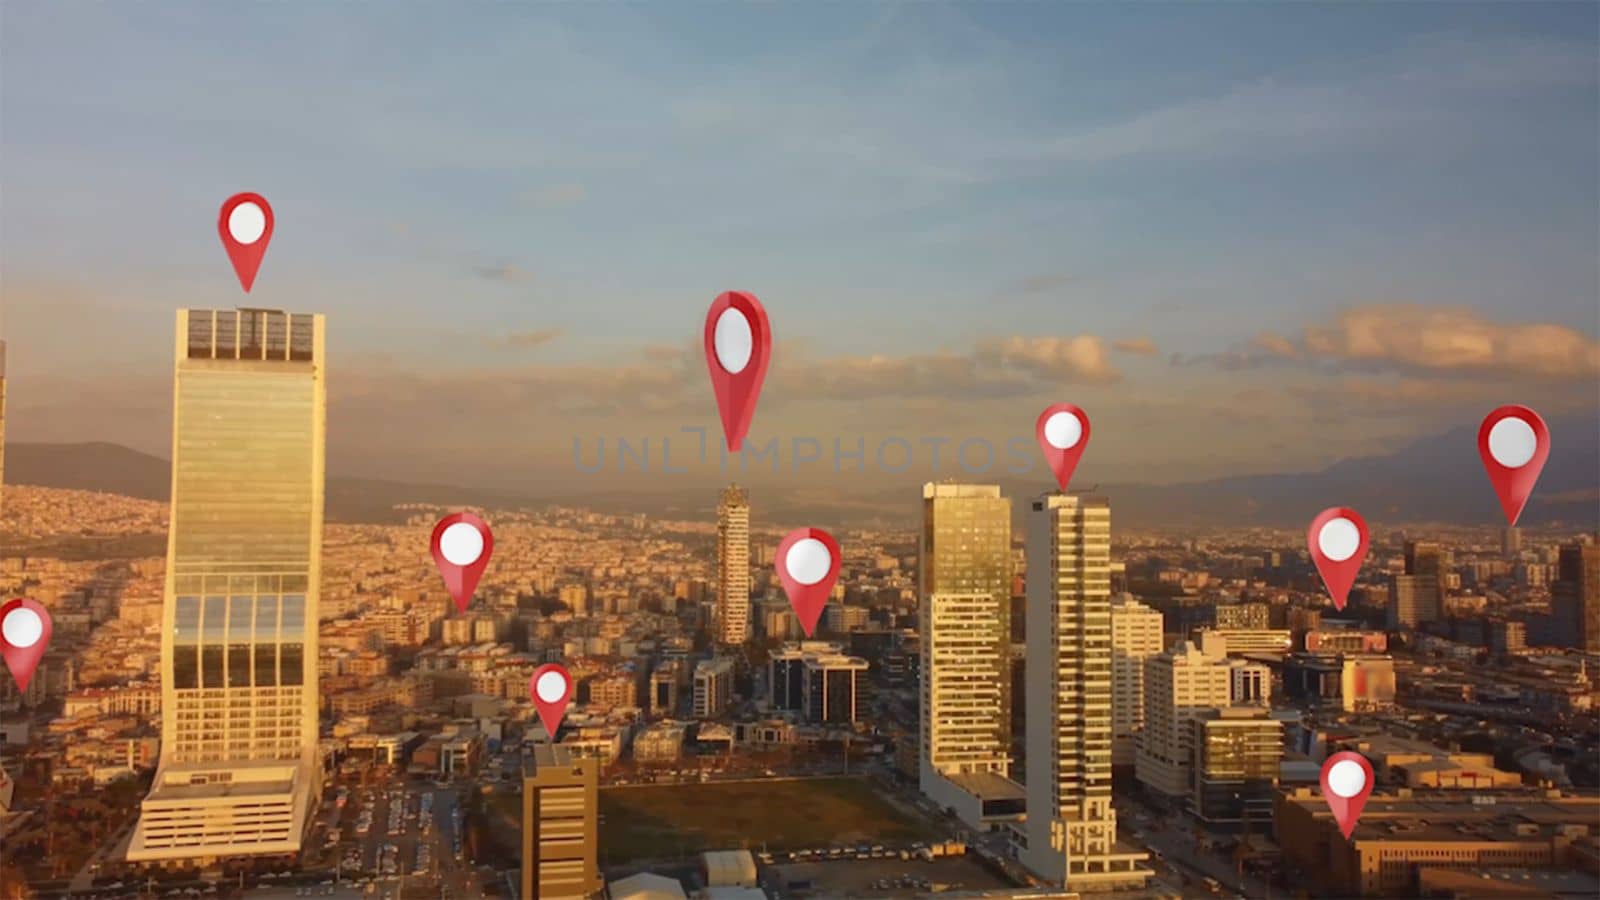 Aerial smart city. Localization icons in a connected futuristic city. Technology concept, data communication, artificial intelligence, internet of things. izmir skyline. by senkaya